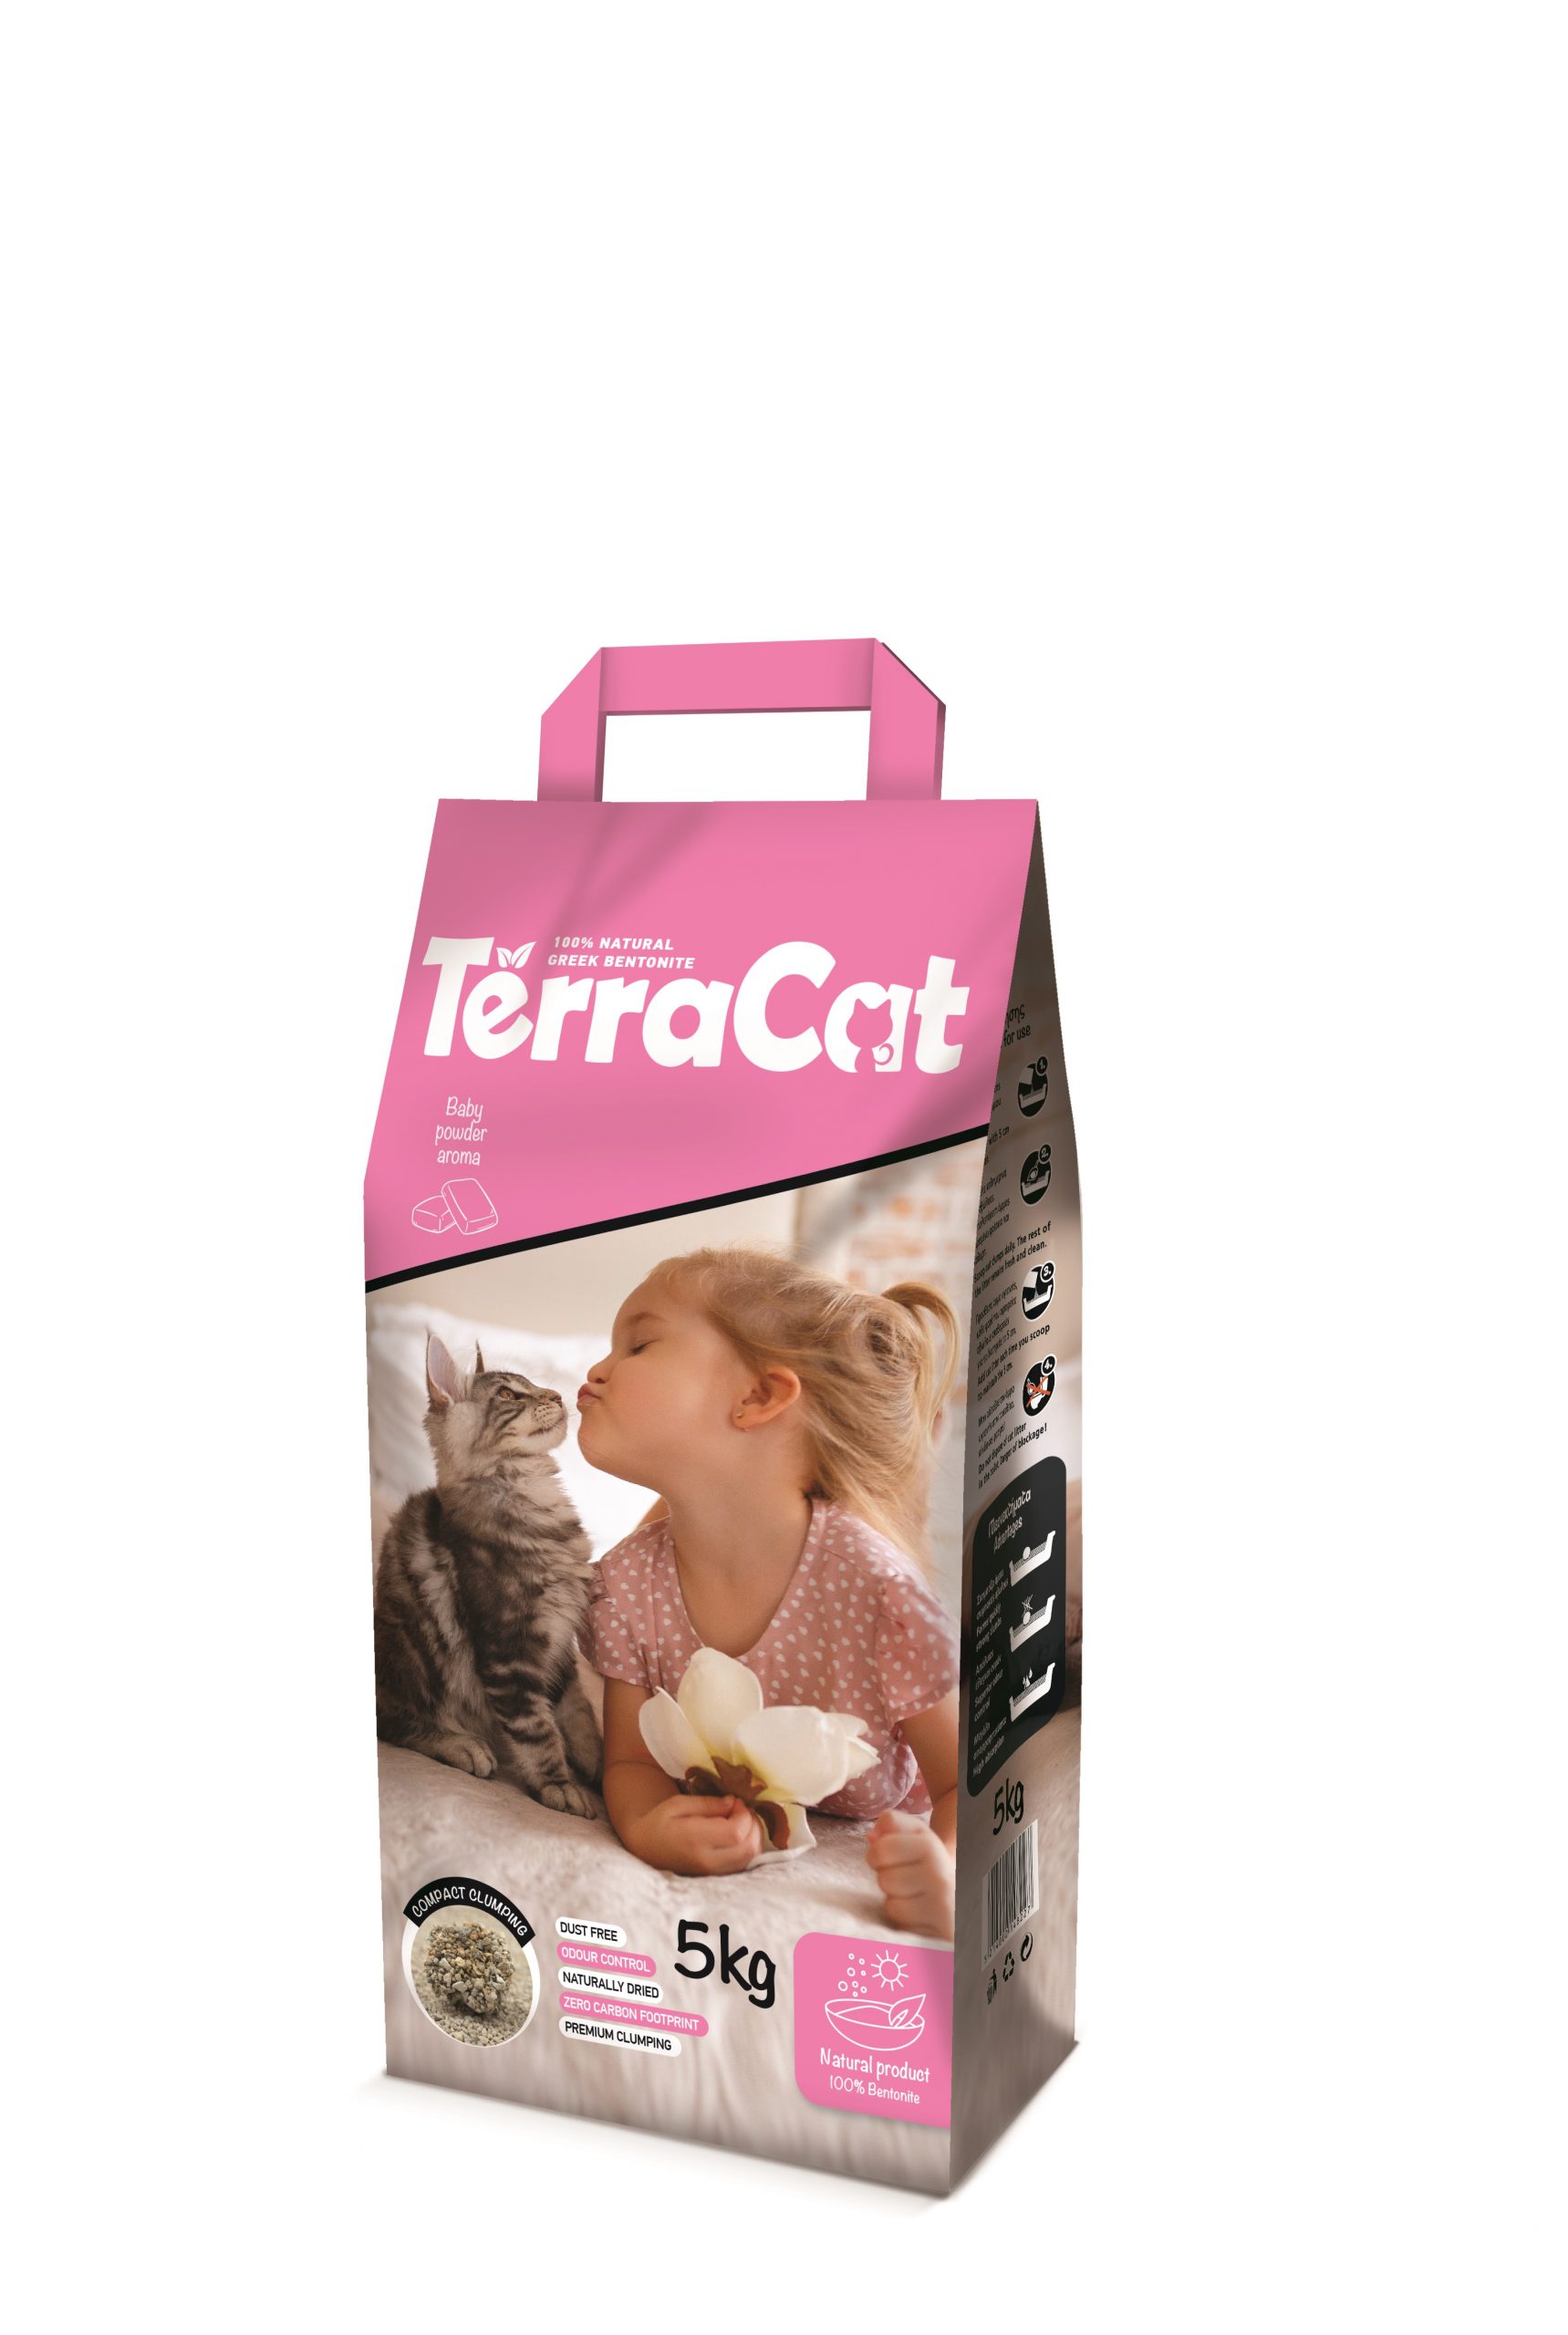 TerraCat Natural Cat Litter perfumed with baby powder (10kg)